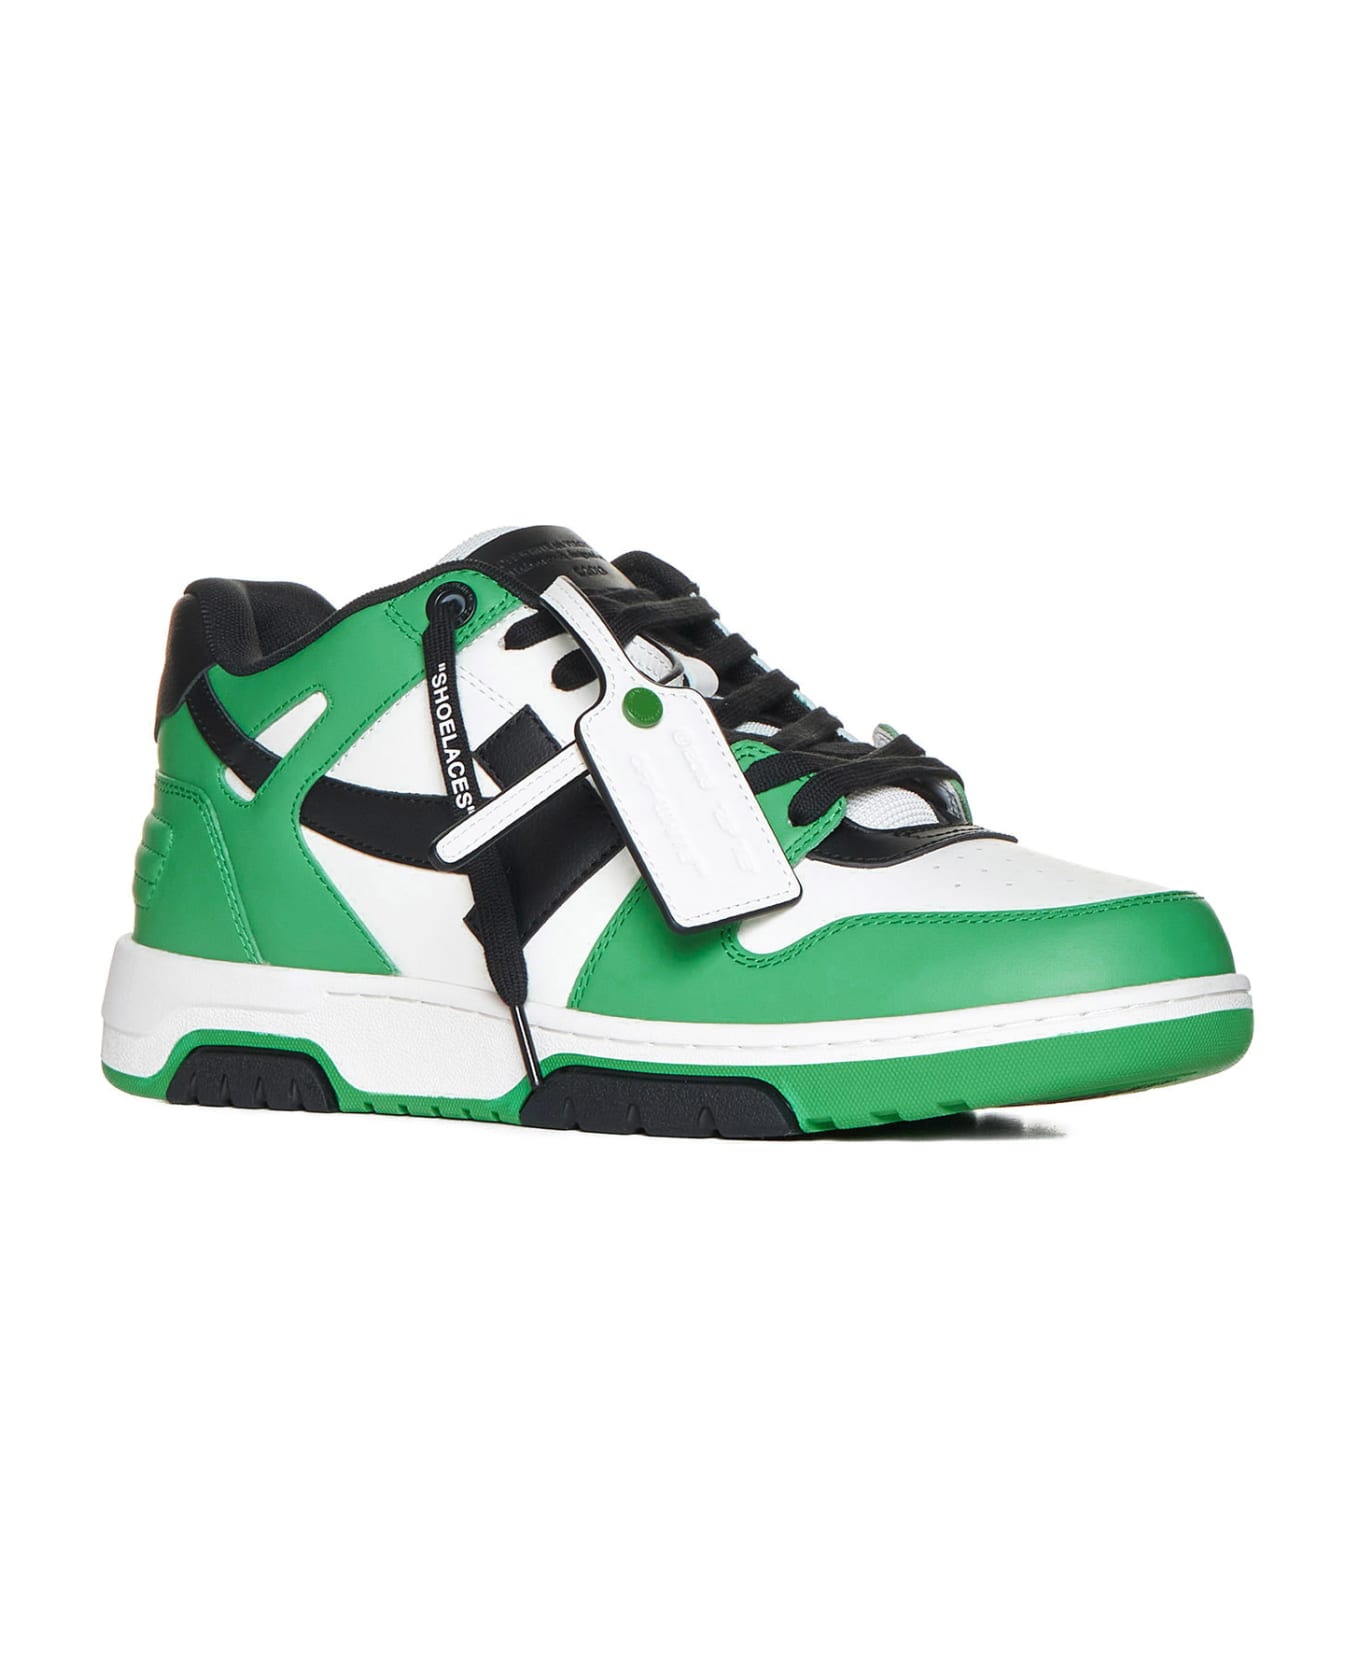 Off-White 'out Of Office' Green Leather Sneakers - Green black